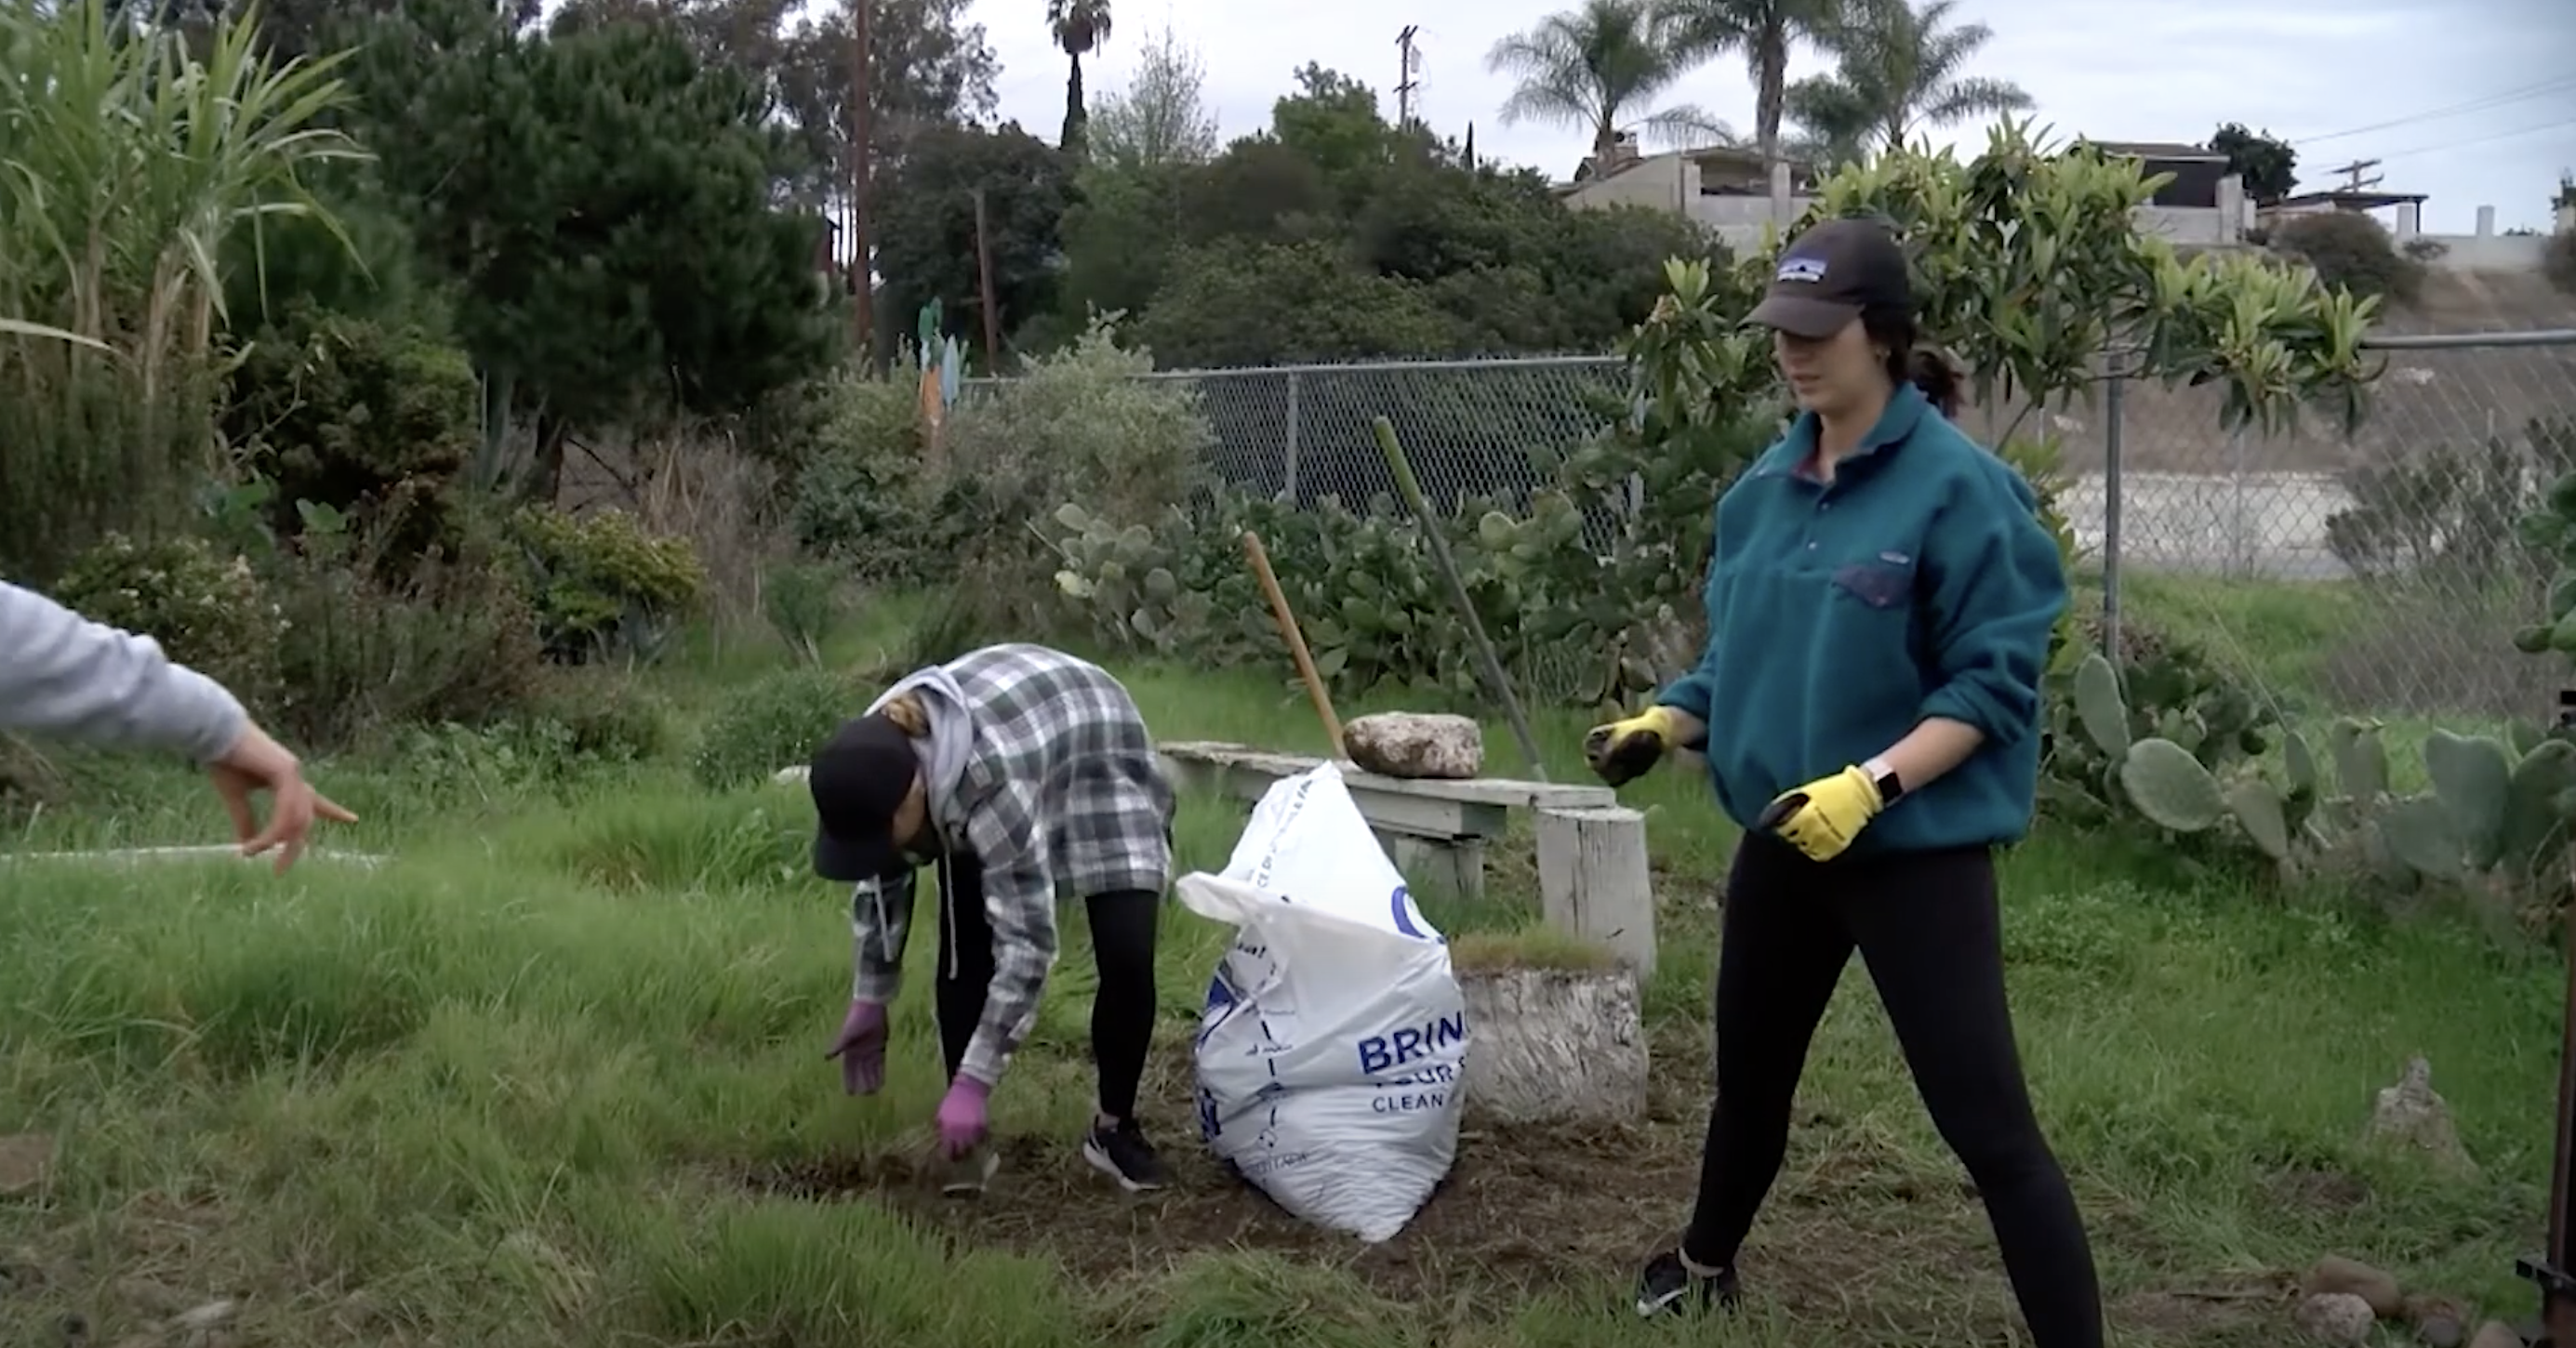 San Diego code updates could bring more community gardens, faster broadband